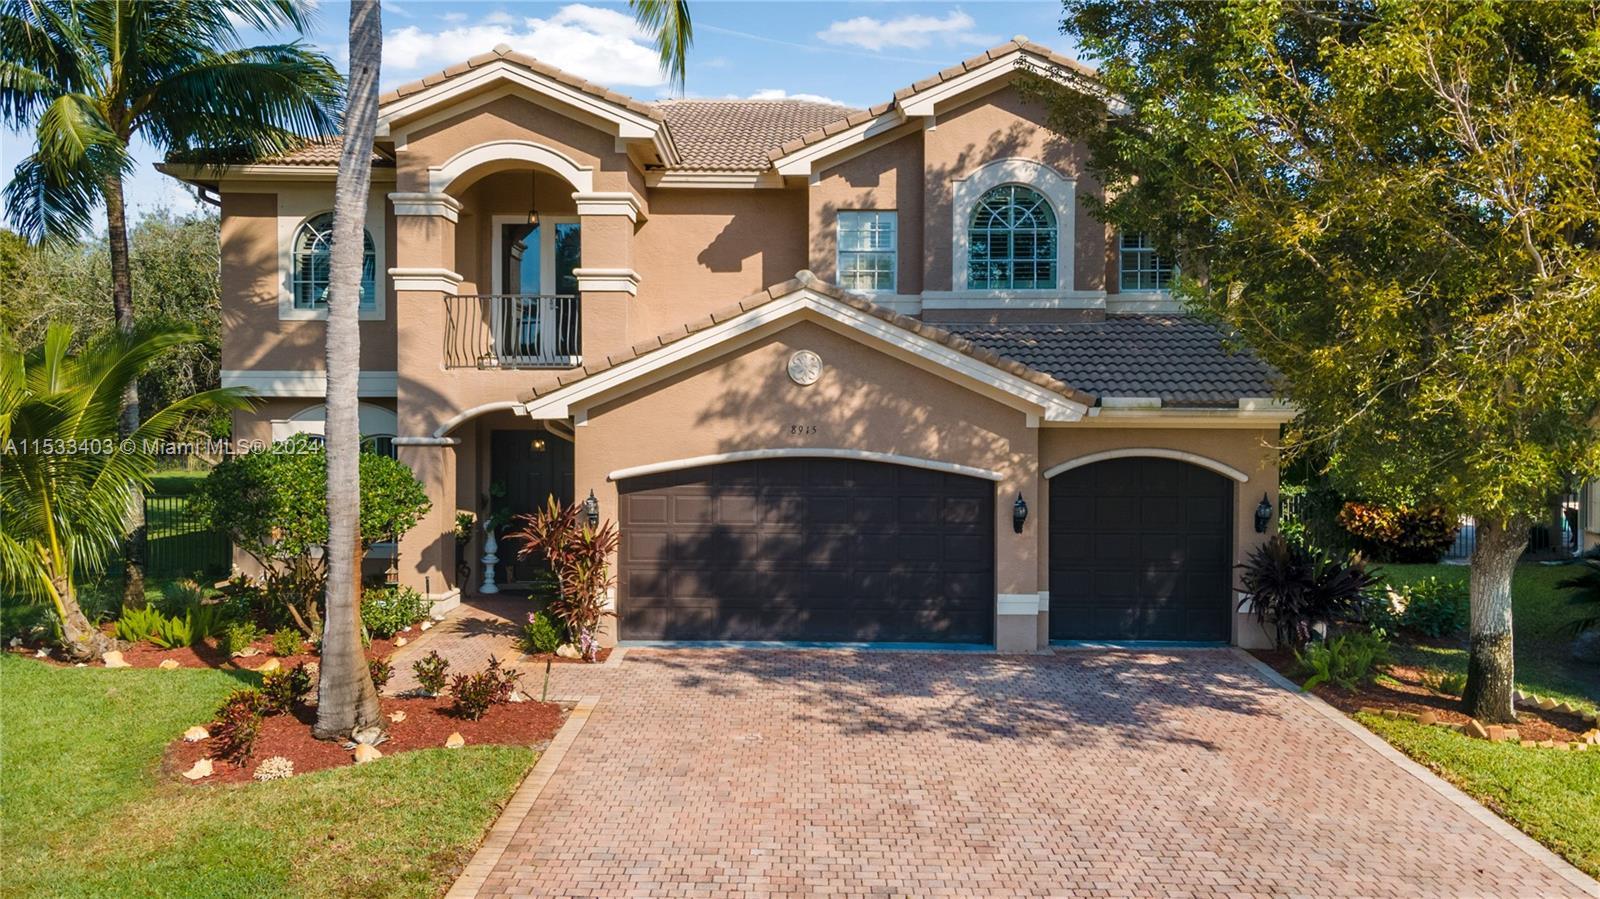 ELEGANT 5 BEDROOM ESTATE HOME ON A PEACEFUL AND PRIVATE OVERSIZED CUL-DE-SAC LOT. MARBLE FLOORING FL